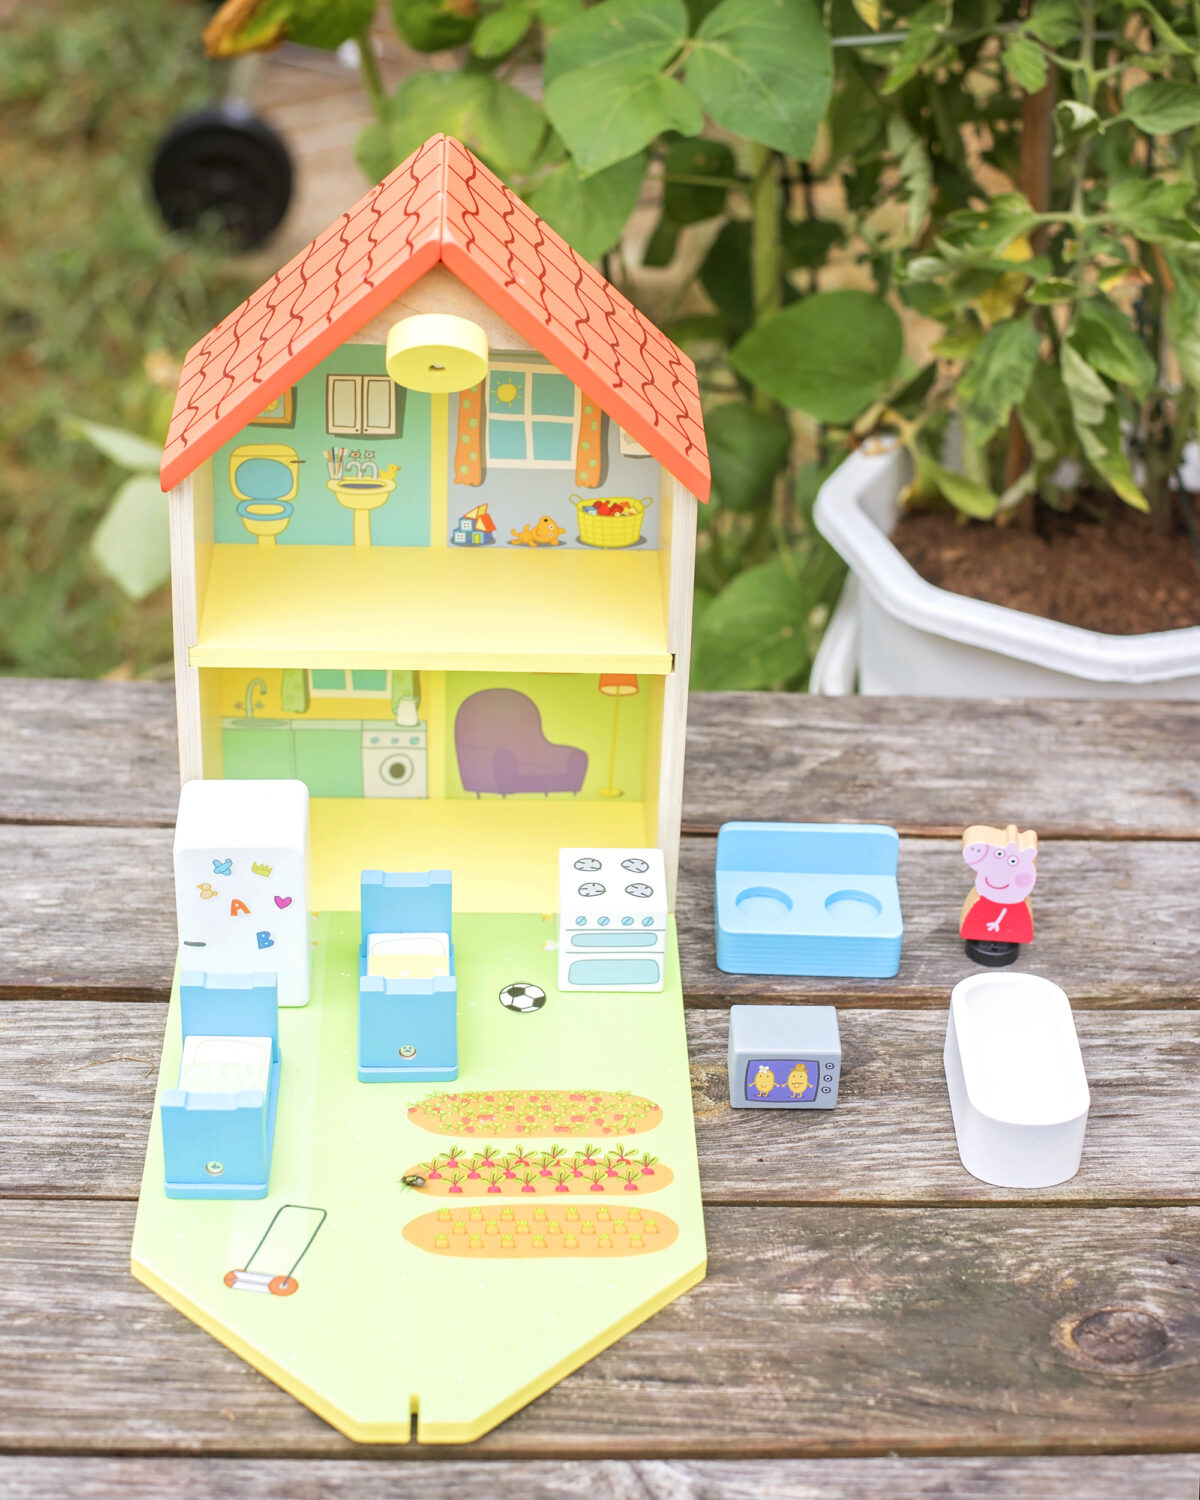 Peppa pig wooden house contents